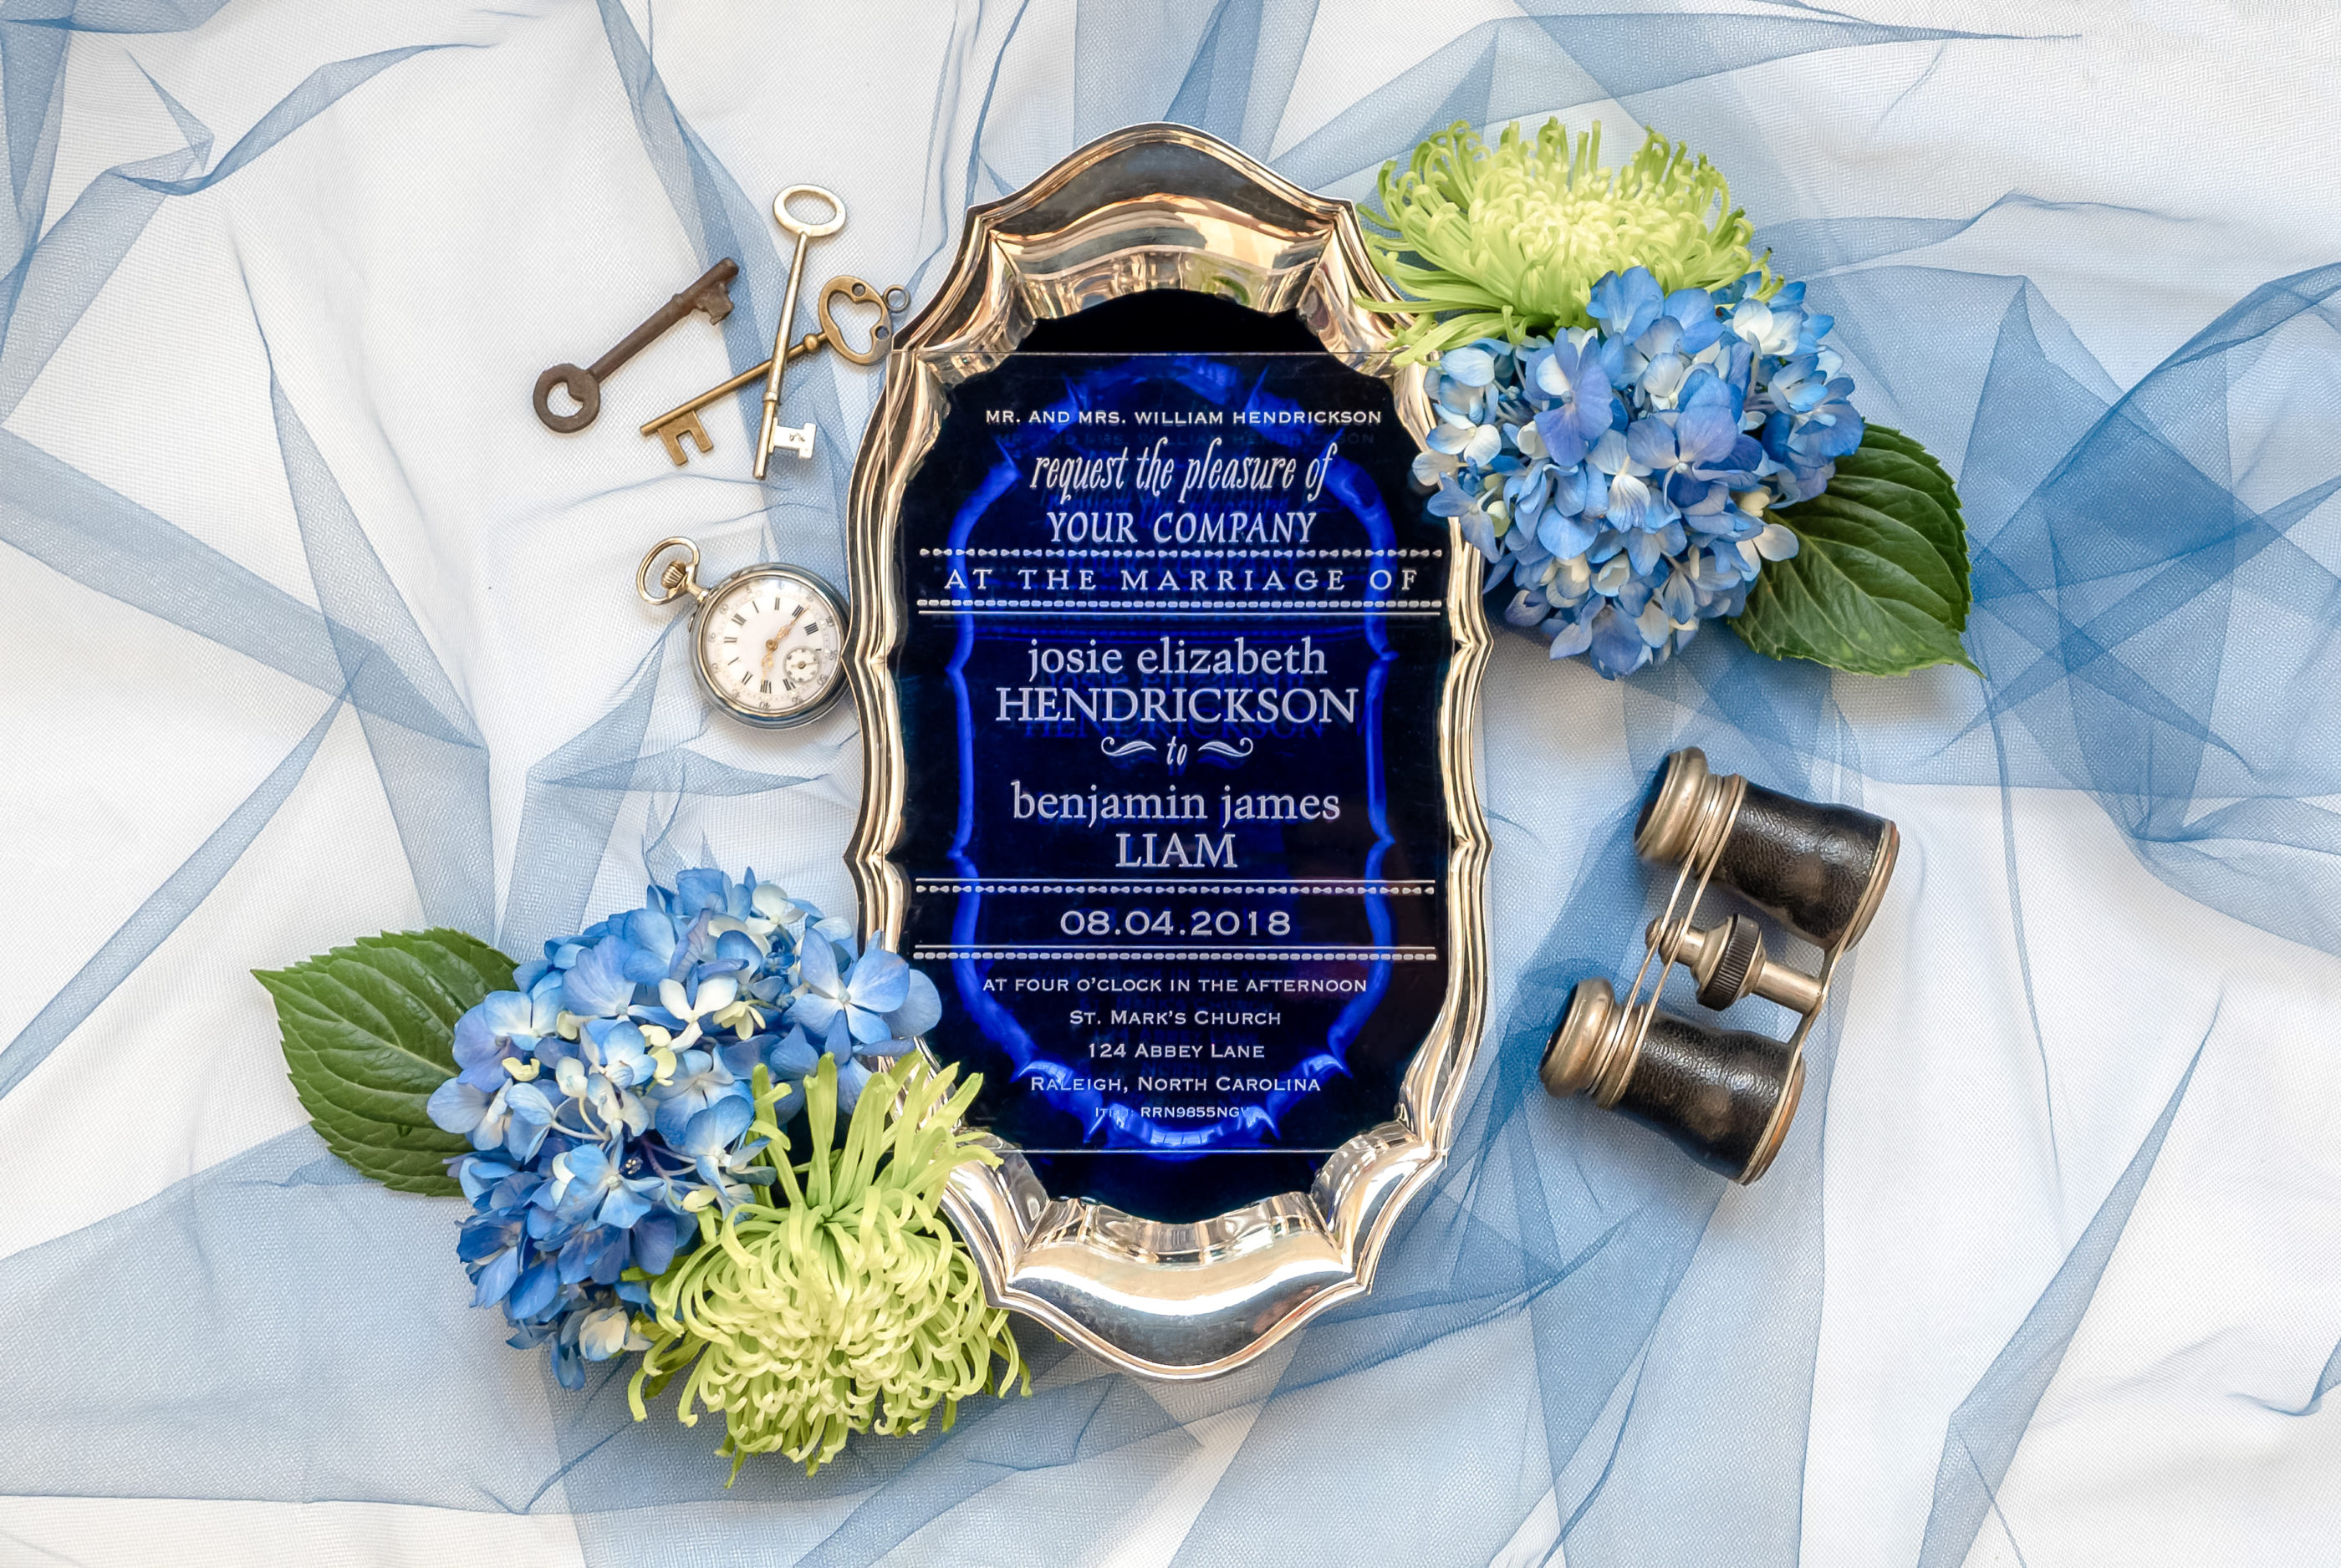 clear acrylic invitation with white writing photographed on dark blue background